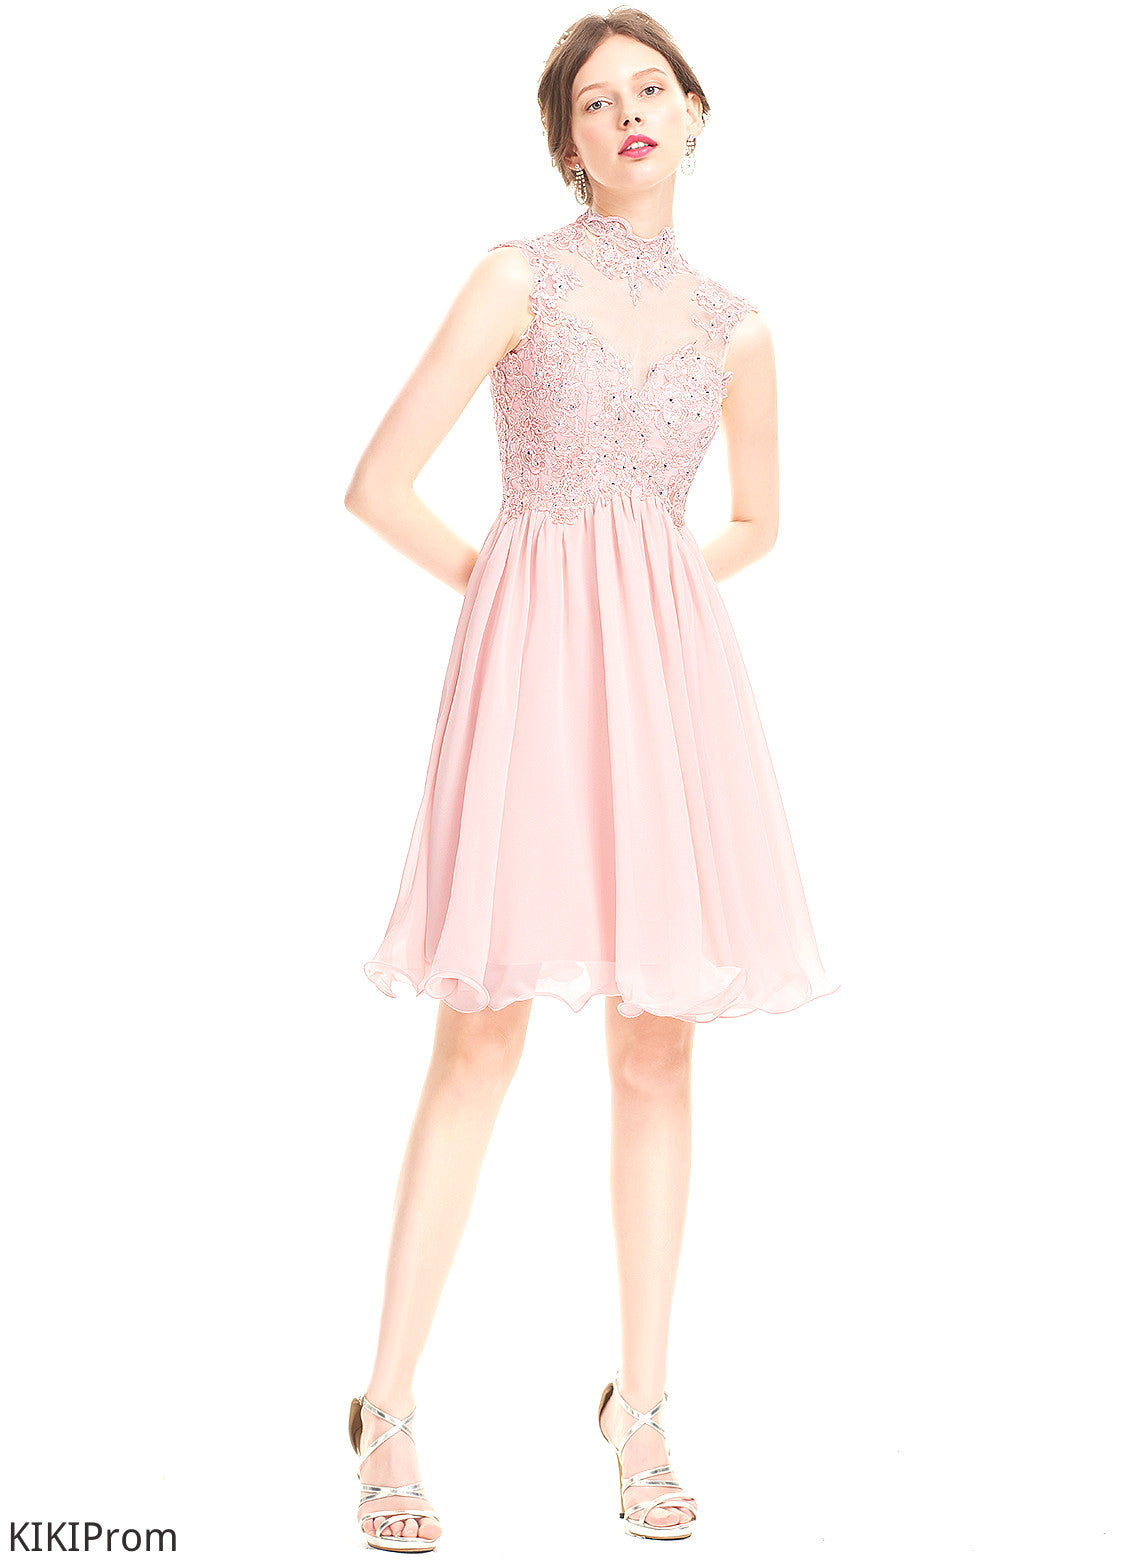 Lyla A-Line Lace Beading Homecoming High Neck Knee-Length With Homecoming Dresses Dress Chiffon